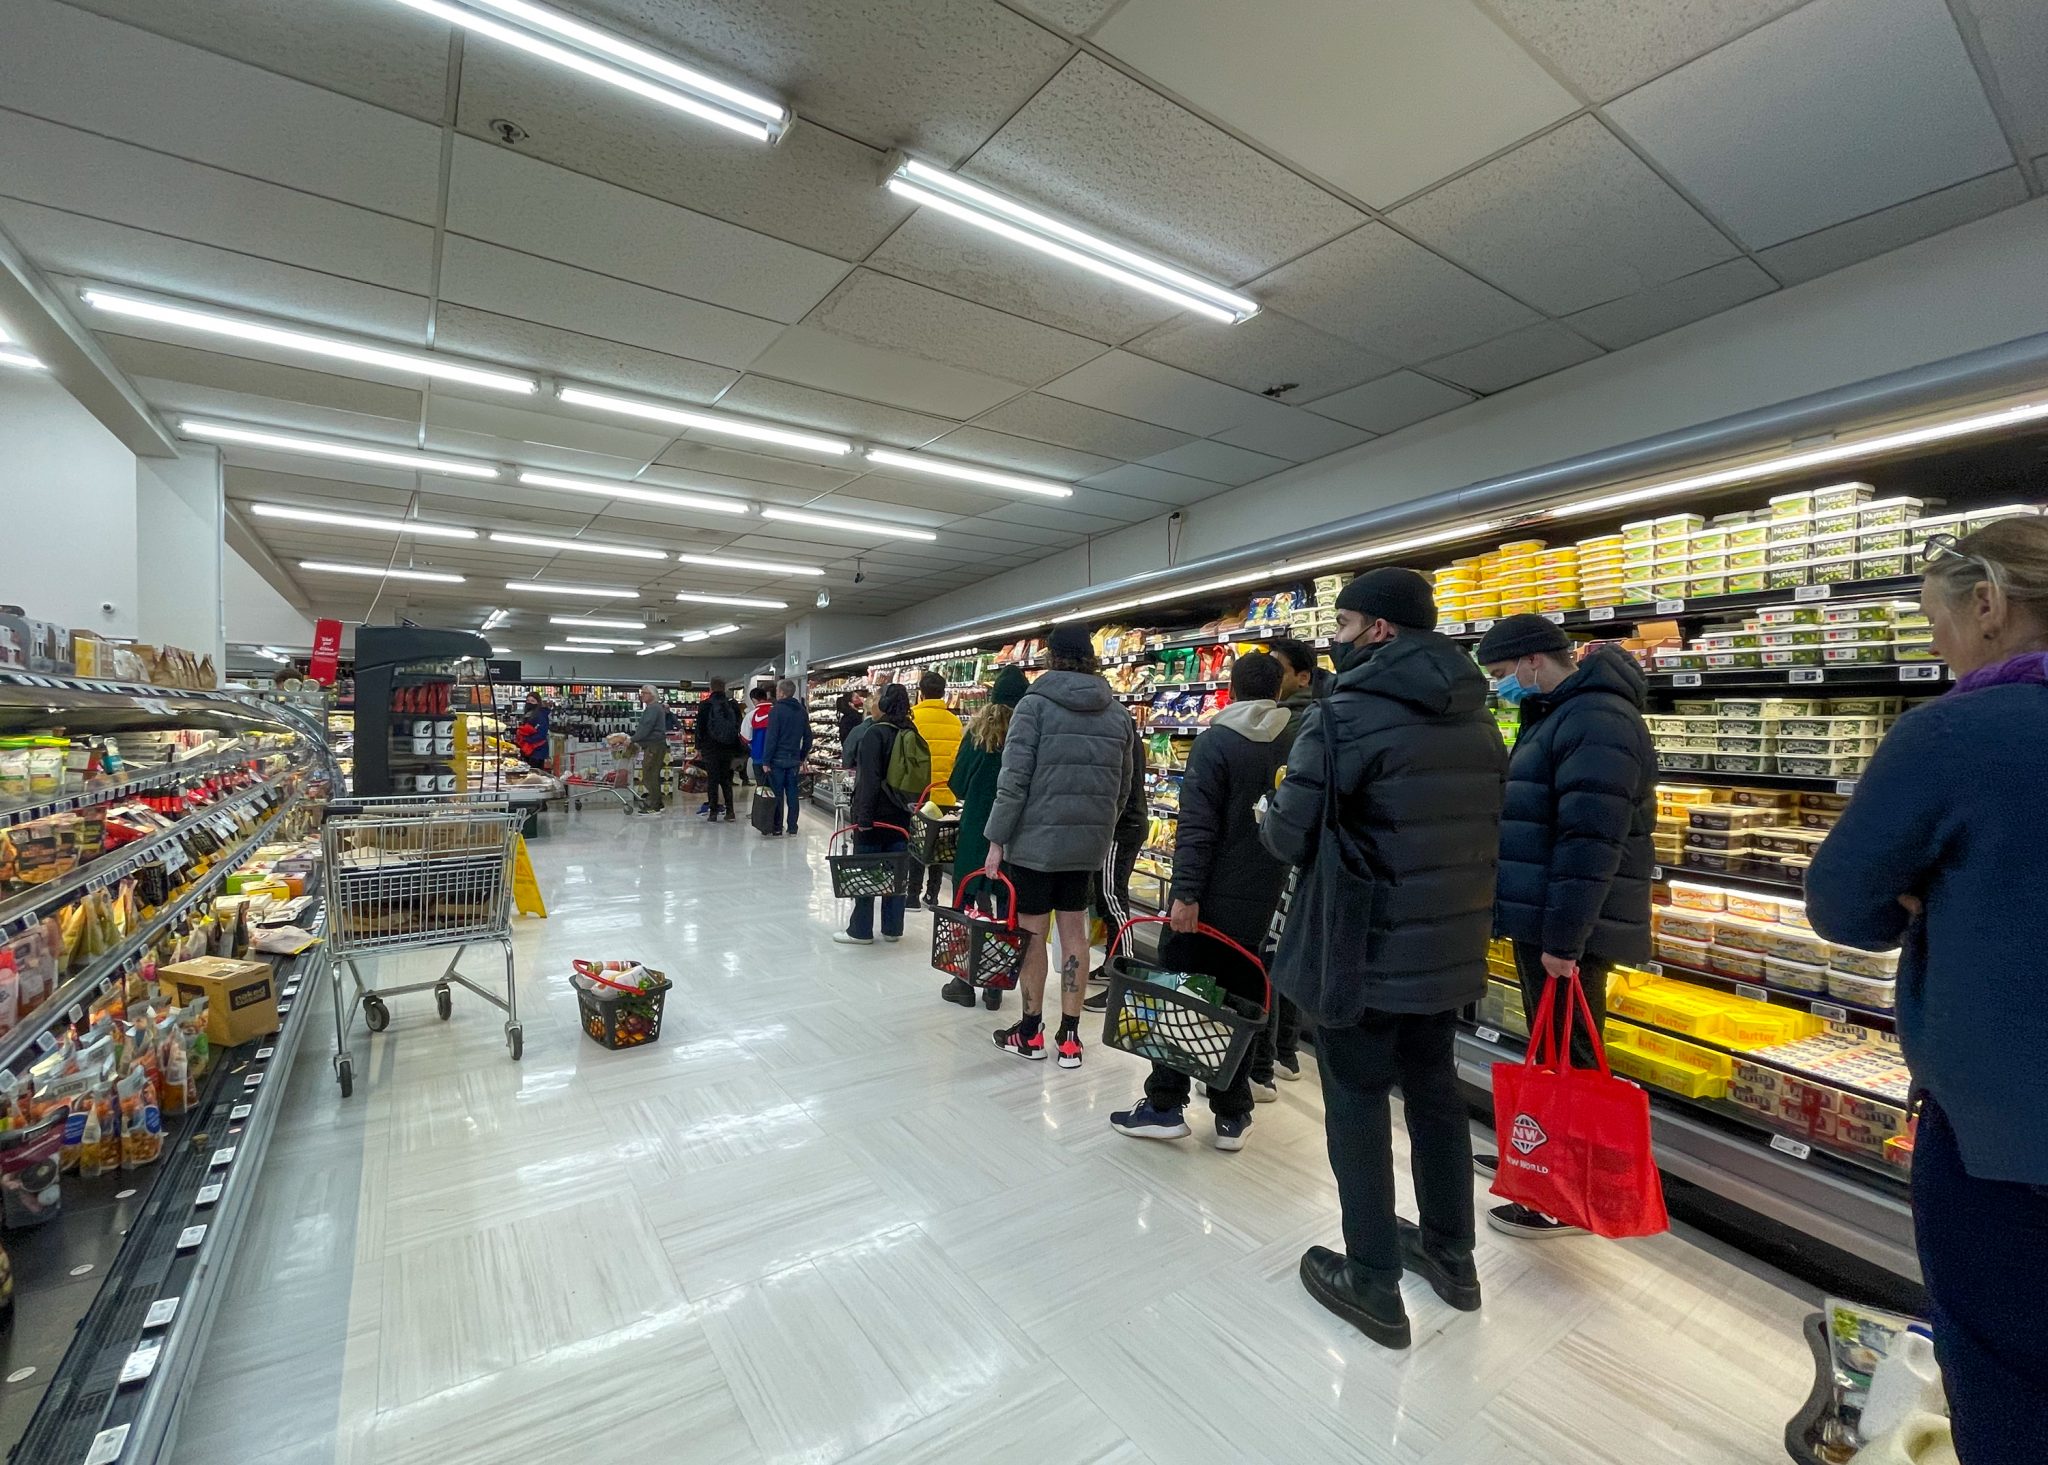 People buy food and daily necessities at a supermarket to prepare for a national COVID-19 lockdown in Wellington, New Zealand